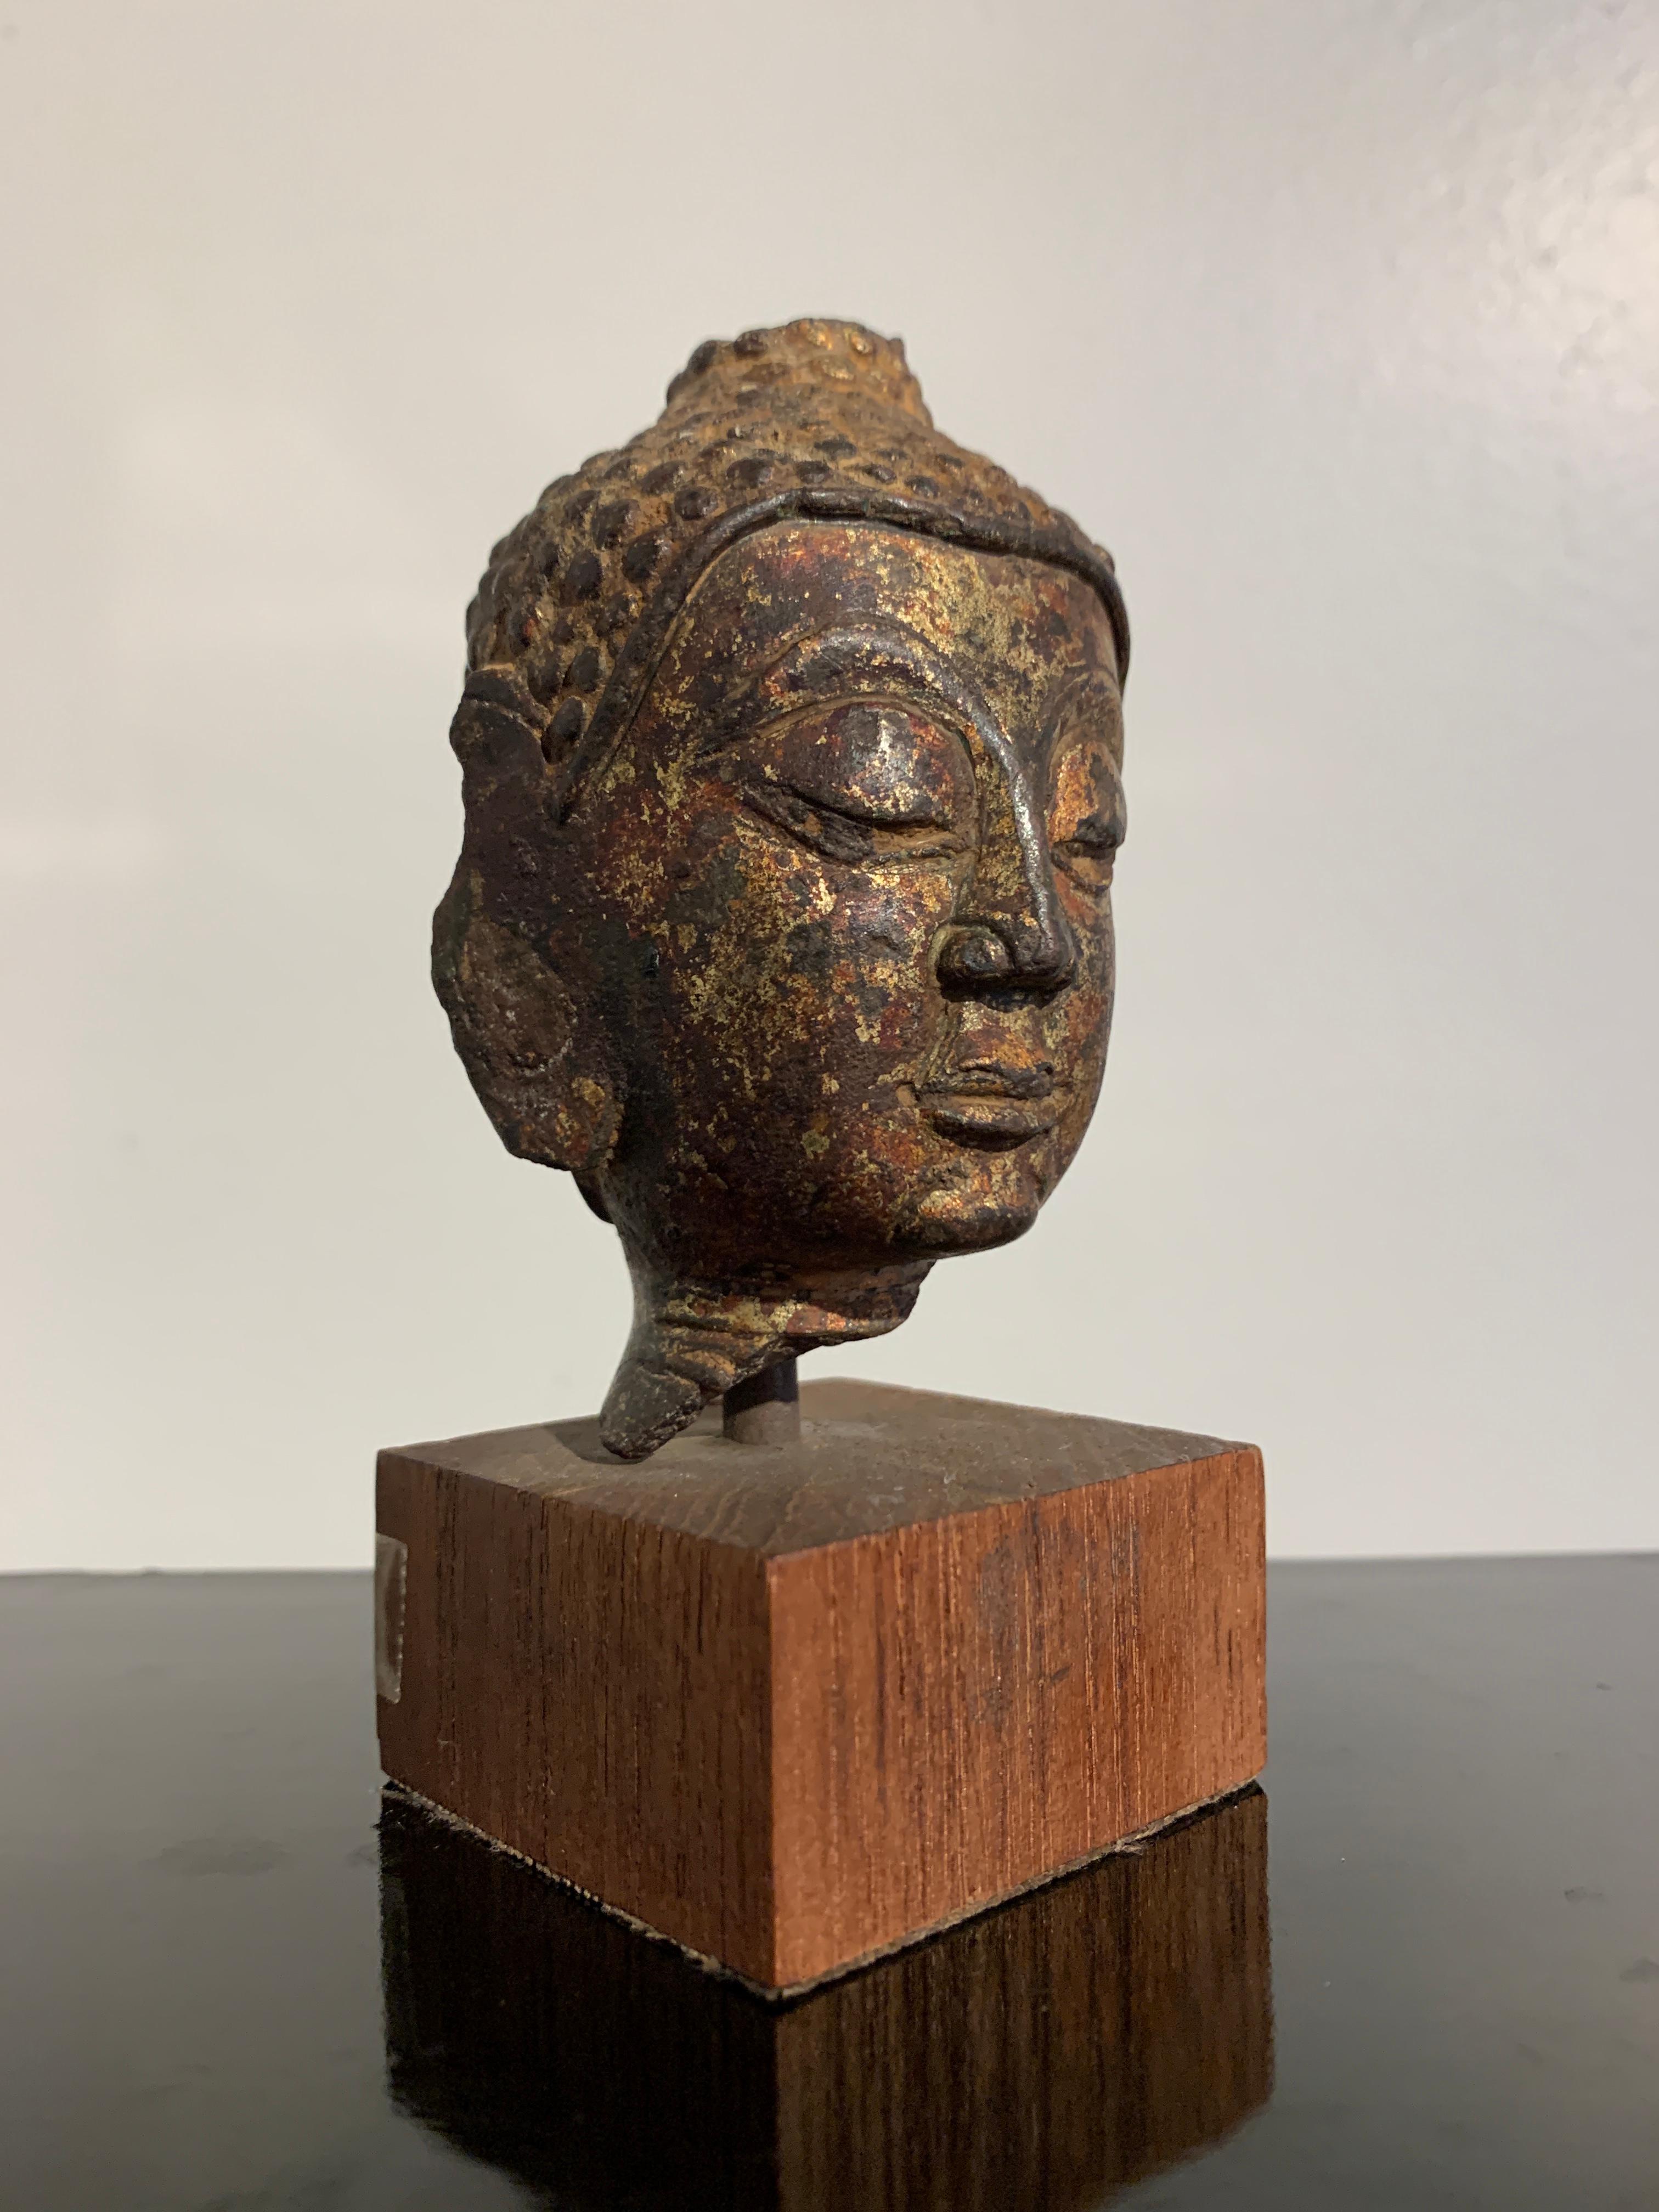 A fine fragmentary gilt bronze head of the Buddha, Lan Na Kingdom, Chiang Saen style, 15th-16th century, Northern Thailand. 

The small head with well cast and defined features, including the wide, prominent nose, two large, almond shaped eyes